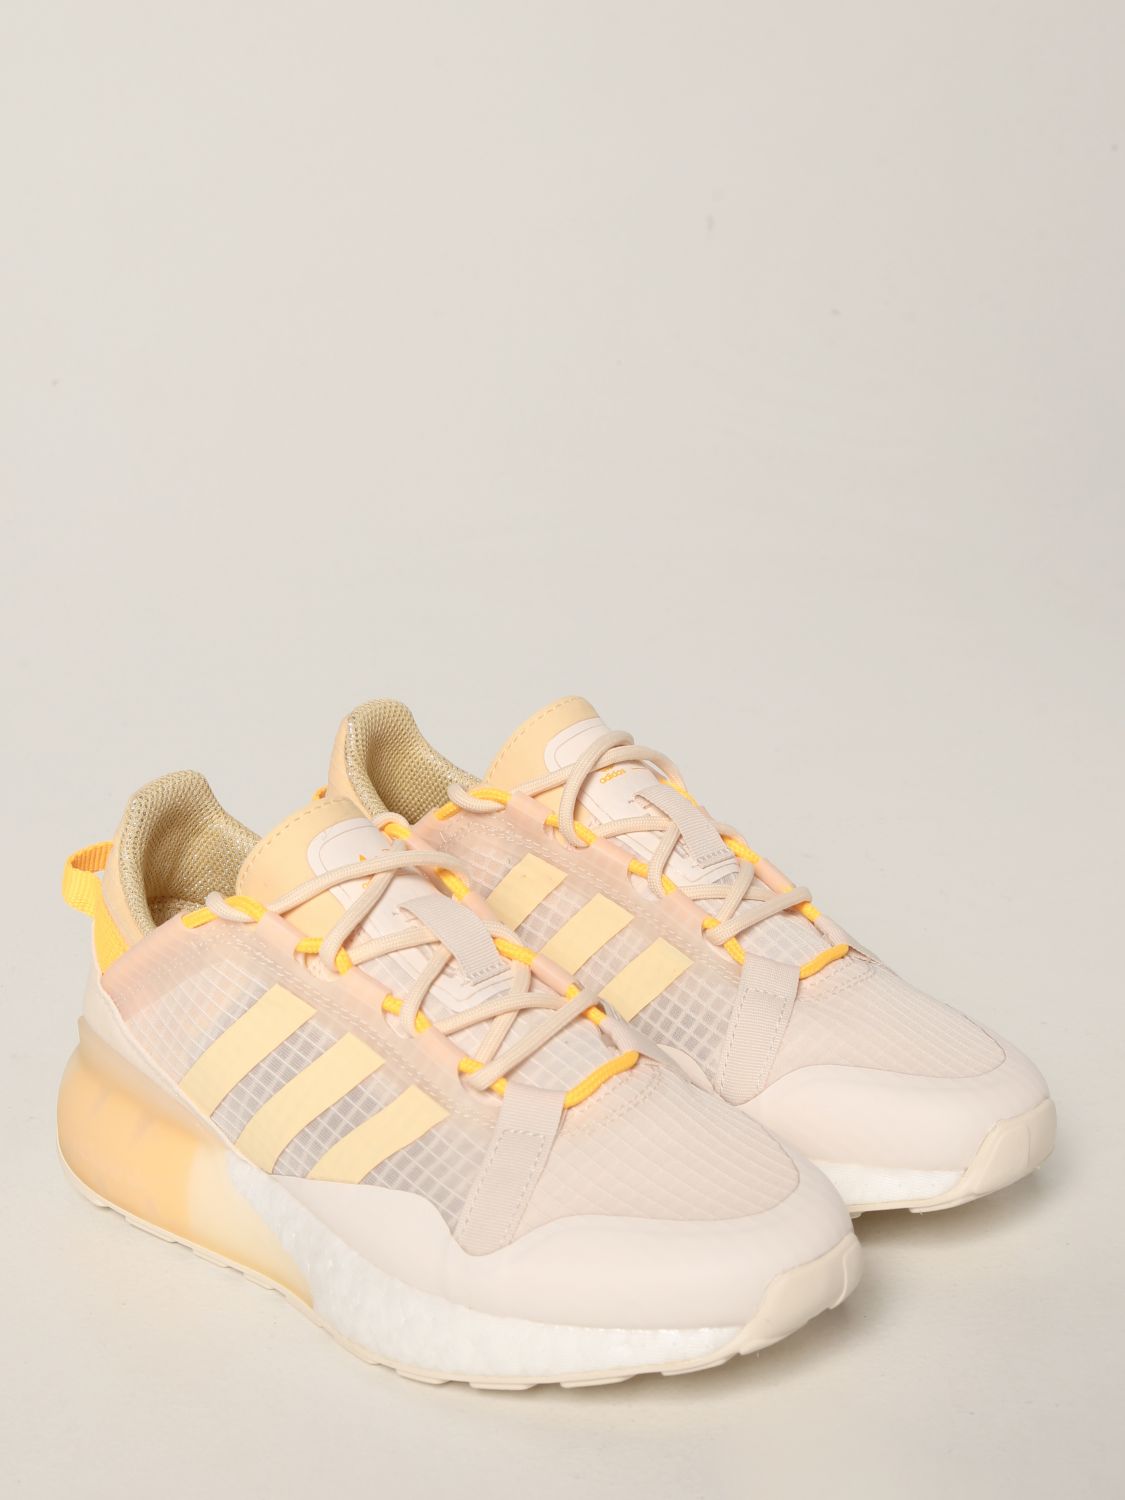 Adidas Originals Outlet: Sneakers Zx 2k Boost Pure - White | Sneakers ...